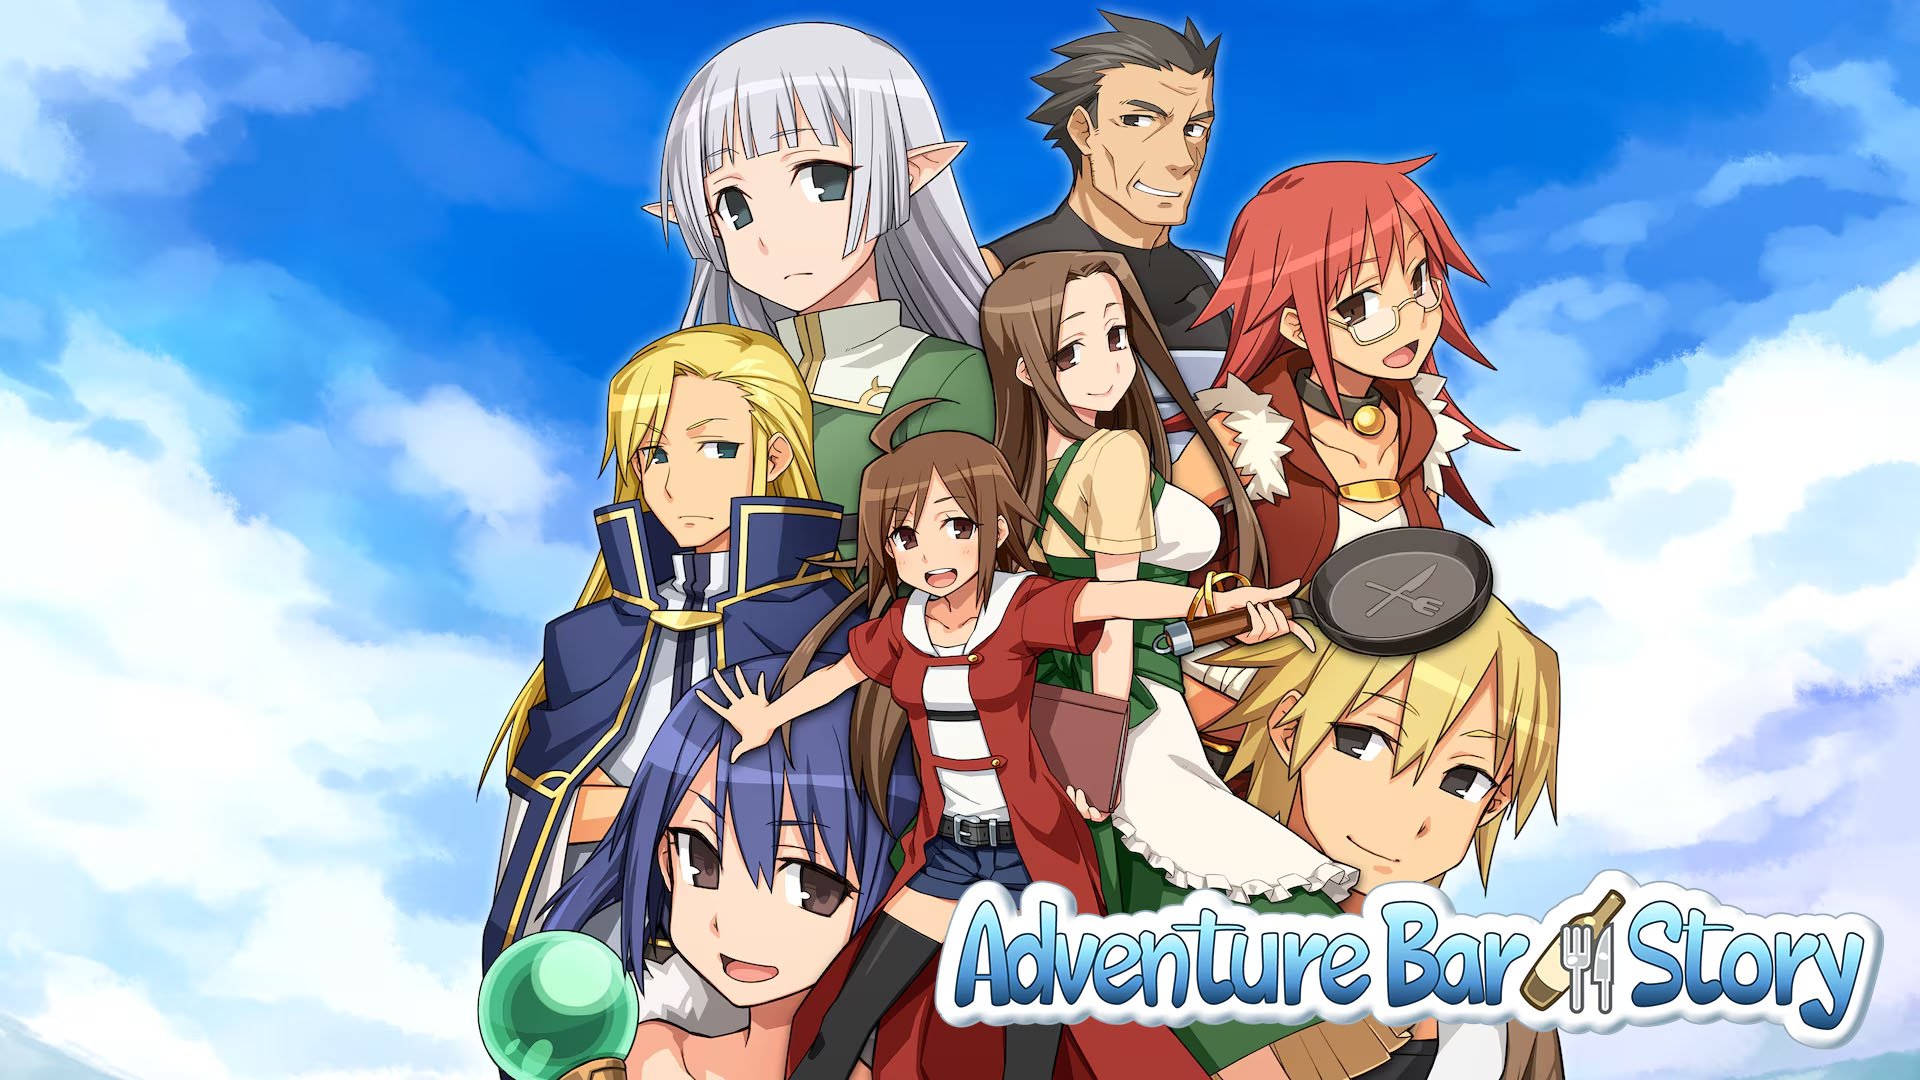 Adventure Bar Story now available worldwide for PS5 and PS4; launches April 25 for Switch and May 9 for PC